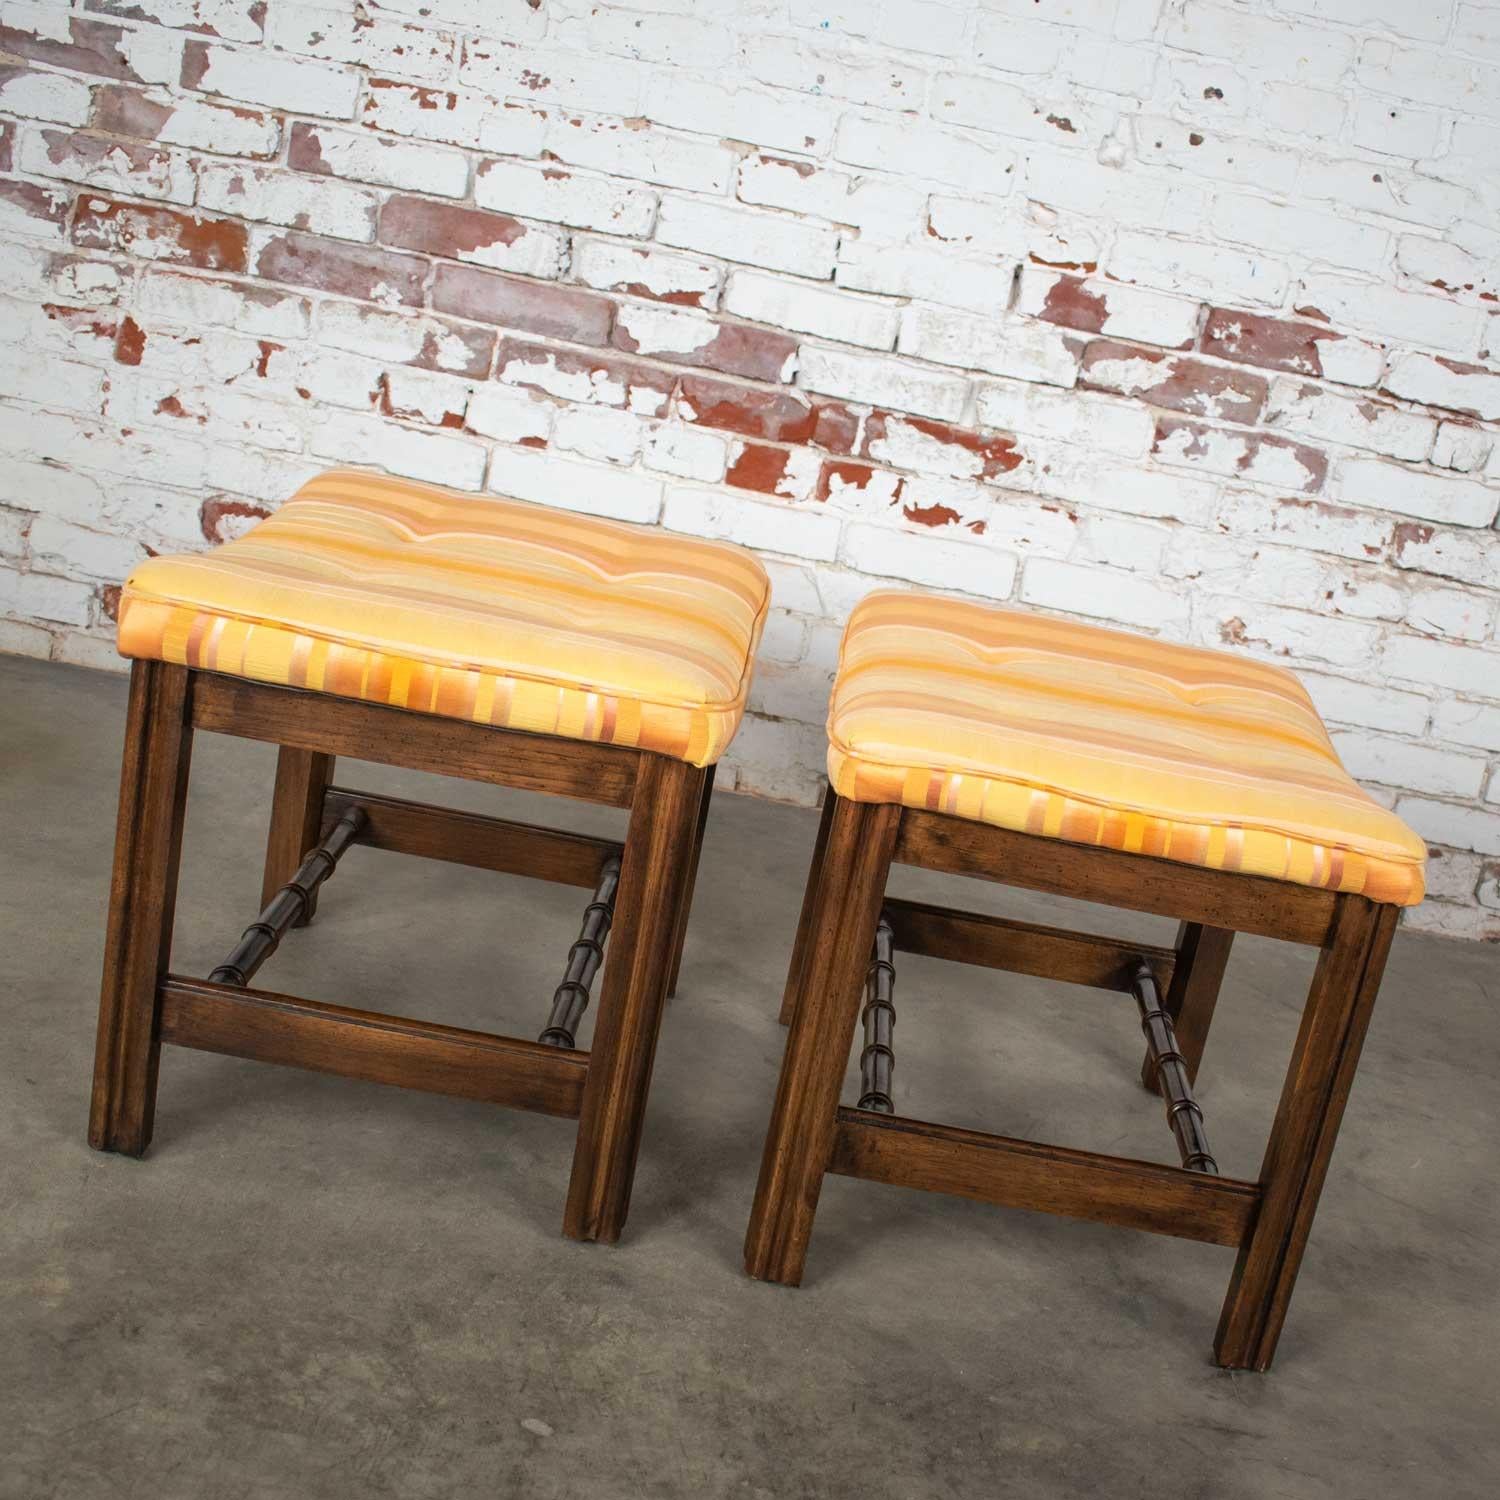 Unknown Chinese Chippendale Pair of Foot Stools in Orange and Yellow Stripe Upholstery